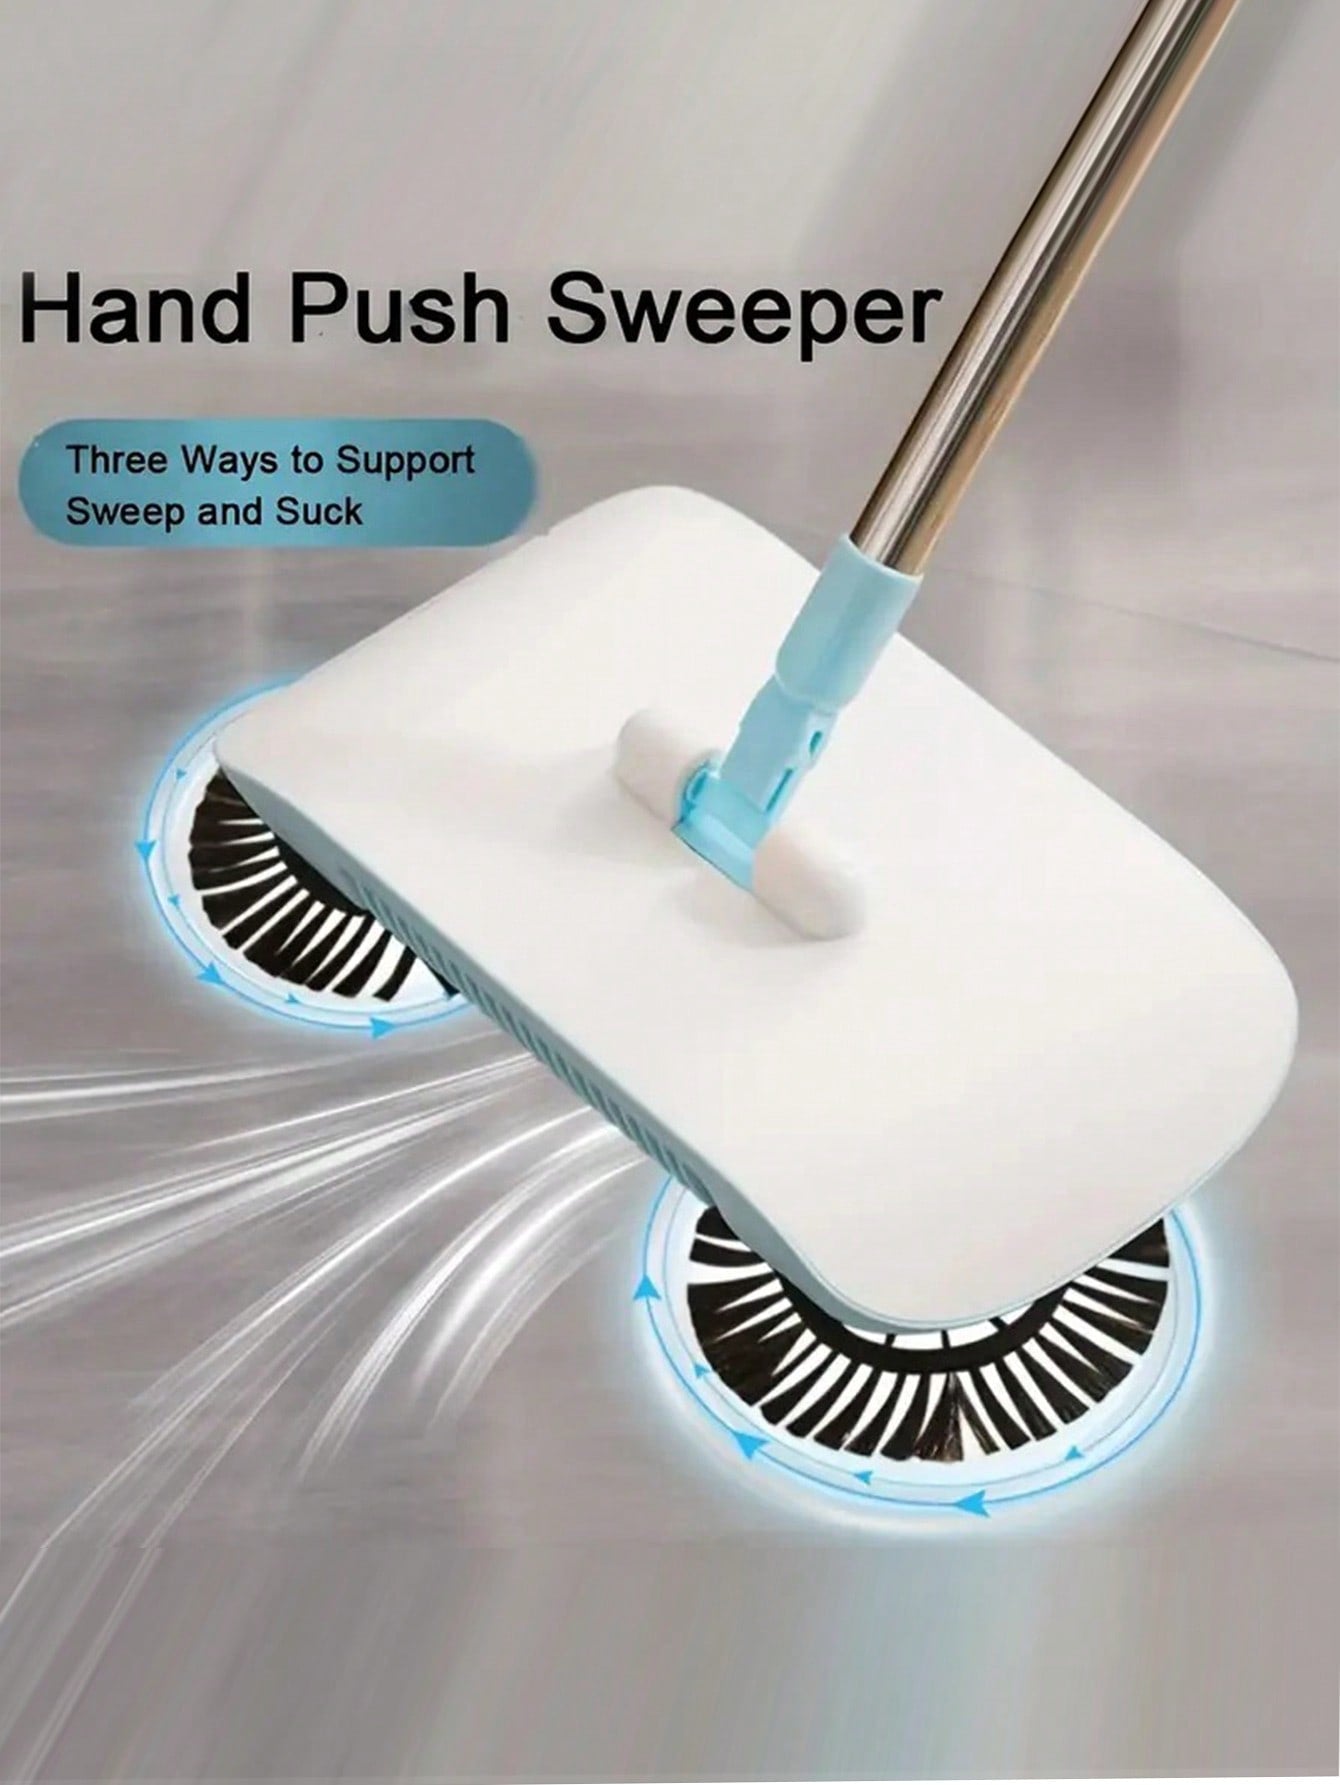 1 Blue Uncharged Automatic Broom And Dustpan Set Household Broom Wiper Sweeper Lazy Broom Mop Vacuum Magic Sweeper Hand Push Mop-Blue-1